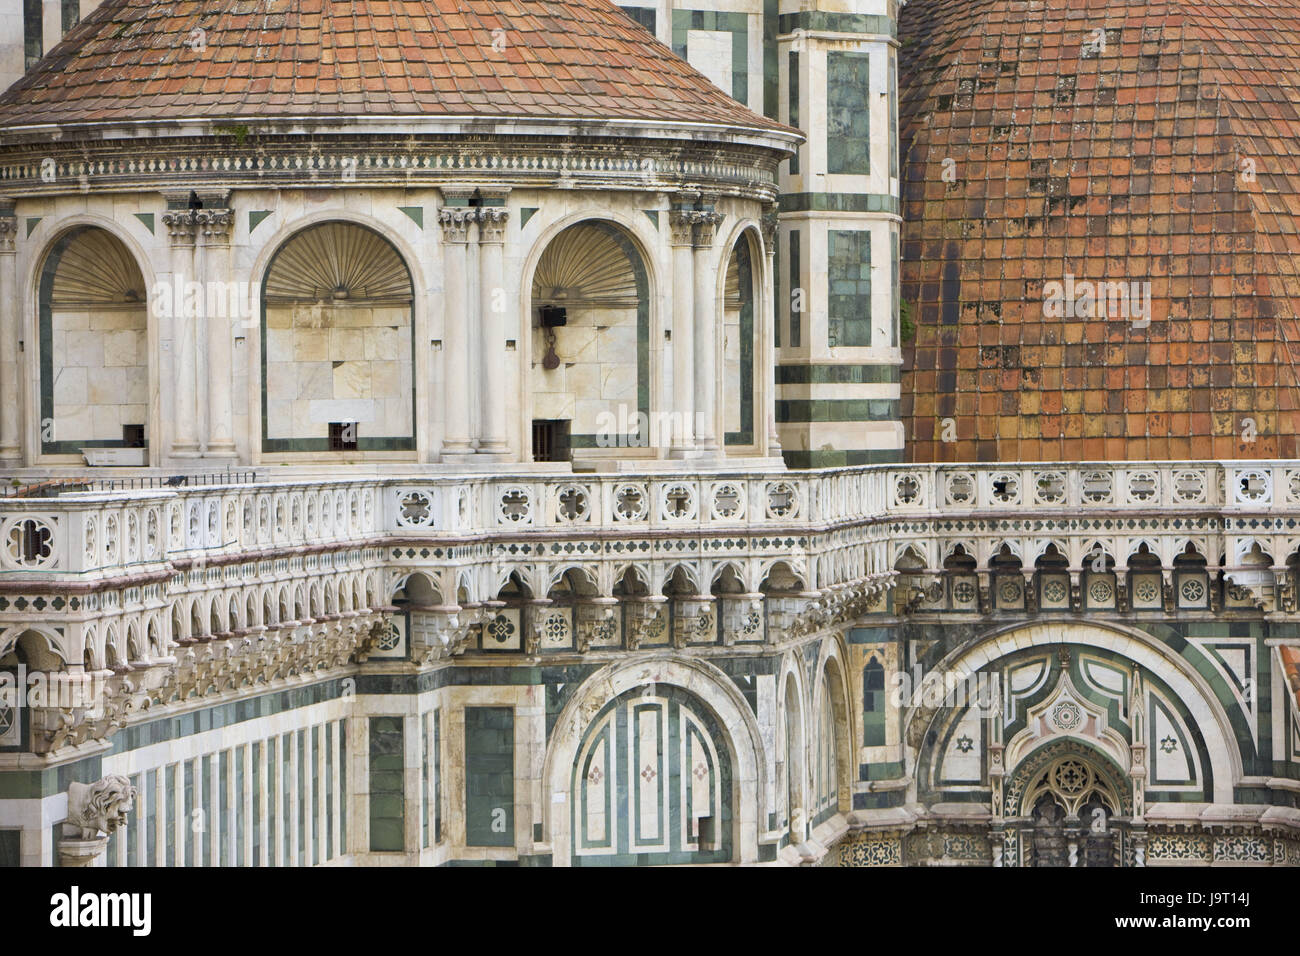 Italy,Tuscany,Florence,Piazza del Duomo,cathedral Santa Maria del Fiore,detail,Europe,town,cathedral square,Old Town,culture,sacred construction,cathedral,church,Duomo,Santa-Maria-del-Fiore,structure,historically,architecture,church facade,marble facade,Apside,dome,curled,landmarks,place of interest,nobody,UNESCO-world cultural heritage,outside, Stock Photo